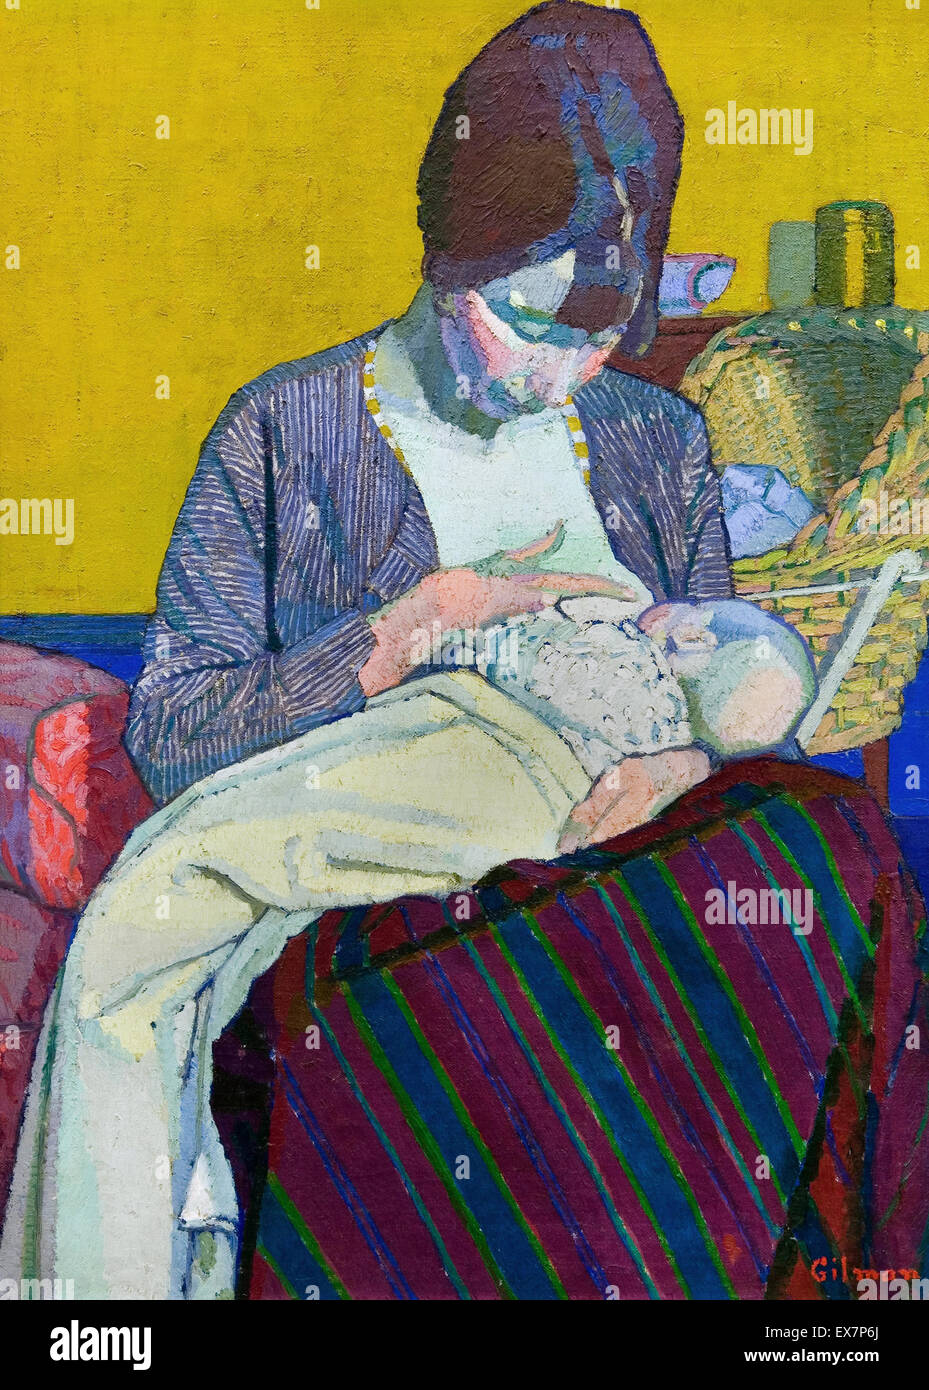 Harold Gilman, Mother and Child 1918 Oil on canvas. Auckland Art Gallery Toi o Tamaki, Auckland, New Zealand. Stock Photo